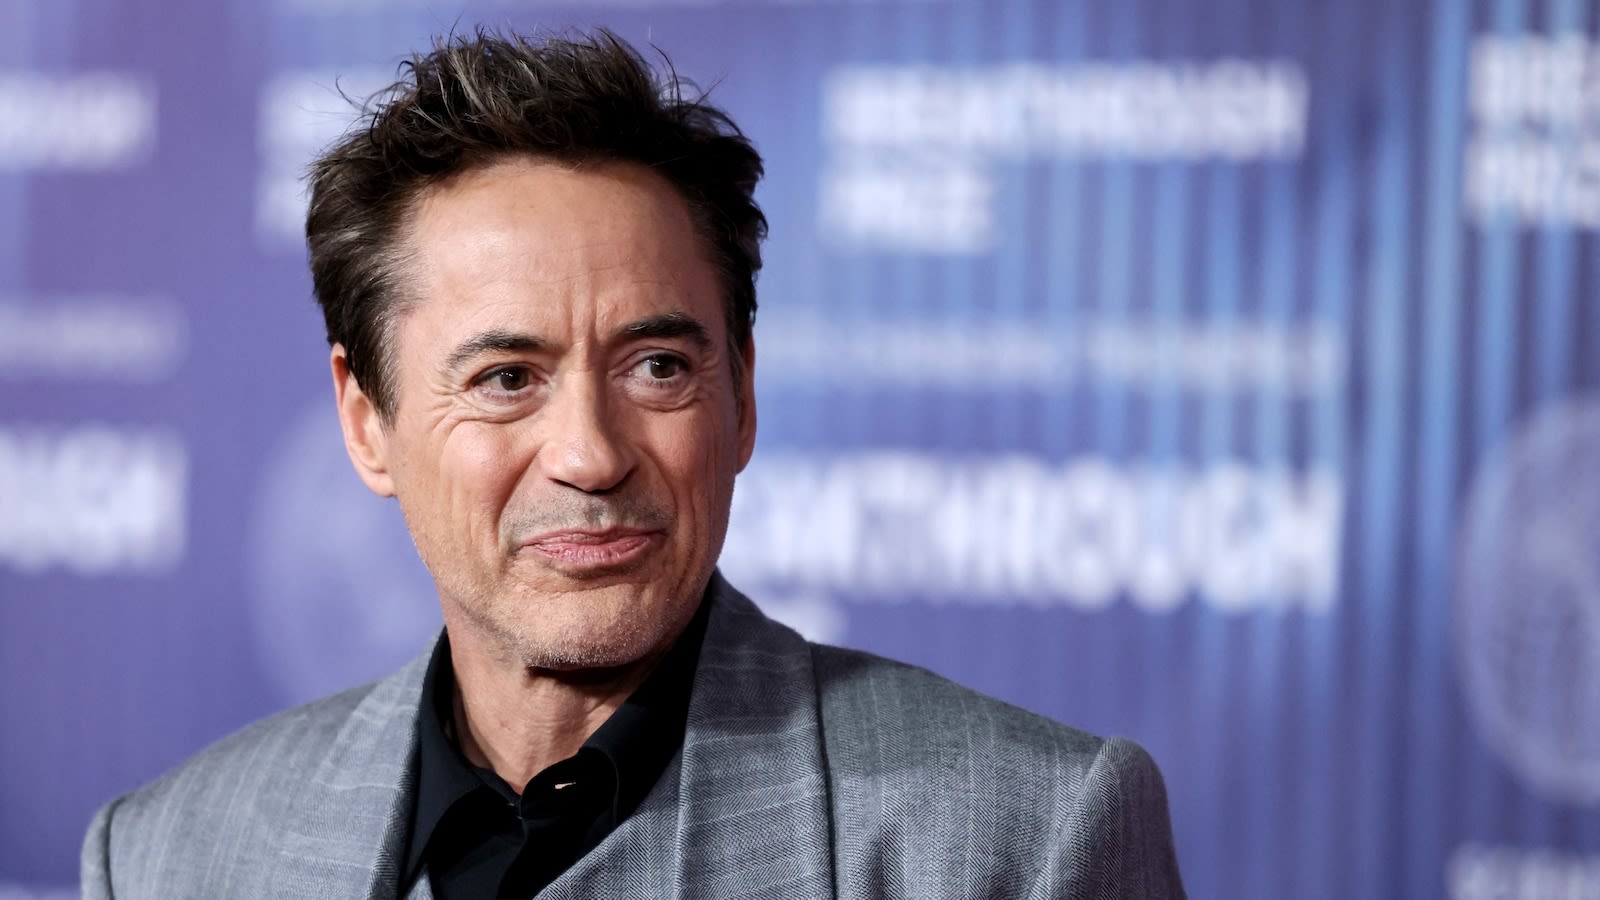 Robert Downey Jr. to make his Broadway debut: 'Hopefully I'll knock the dust off'